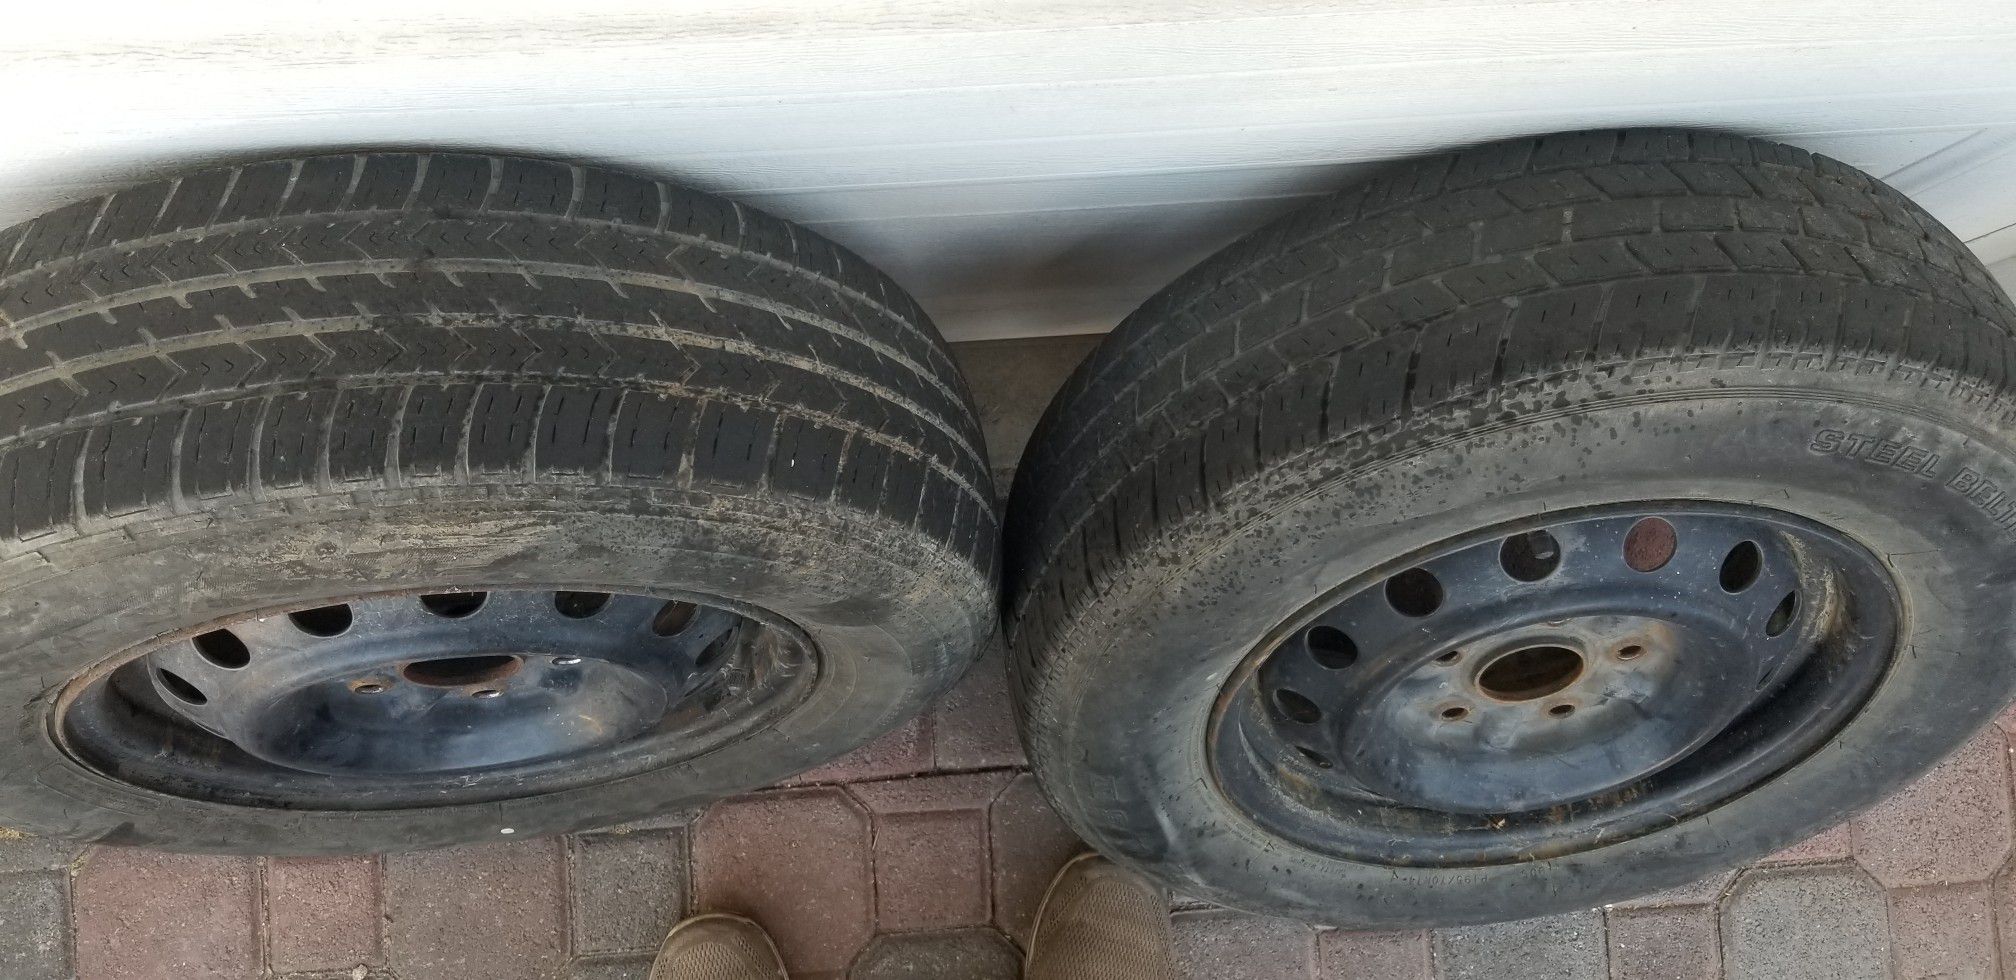 2 trailer wheels and tires